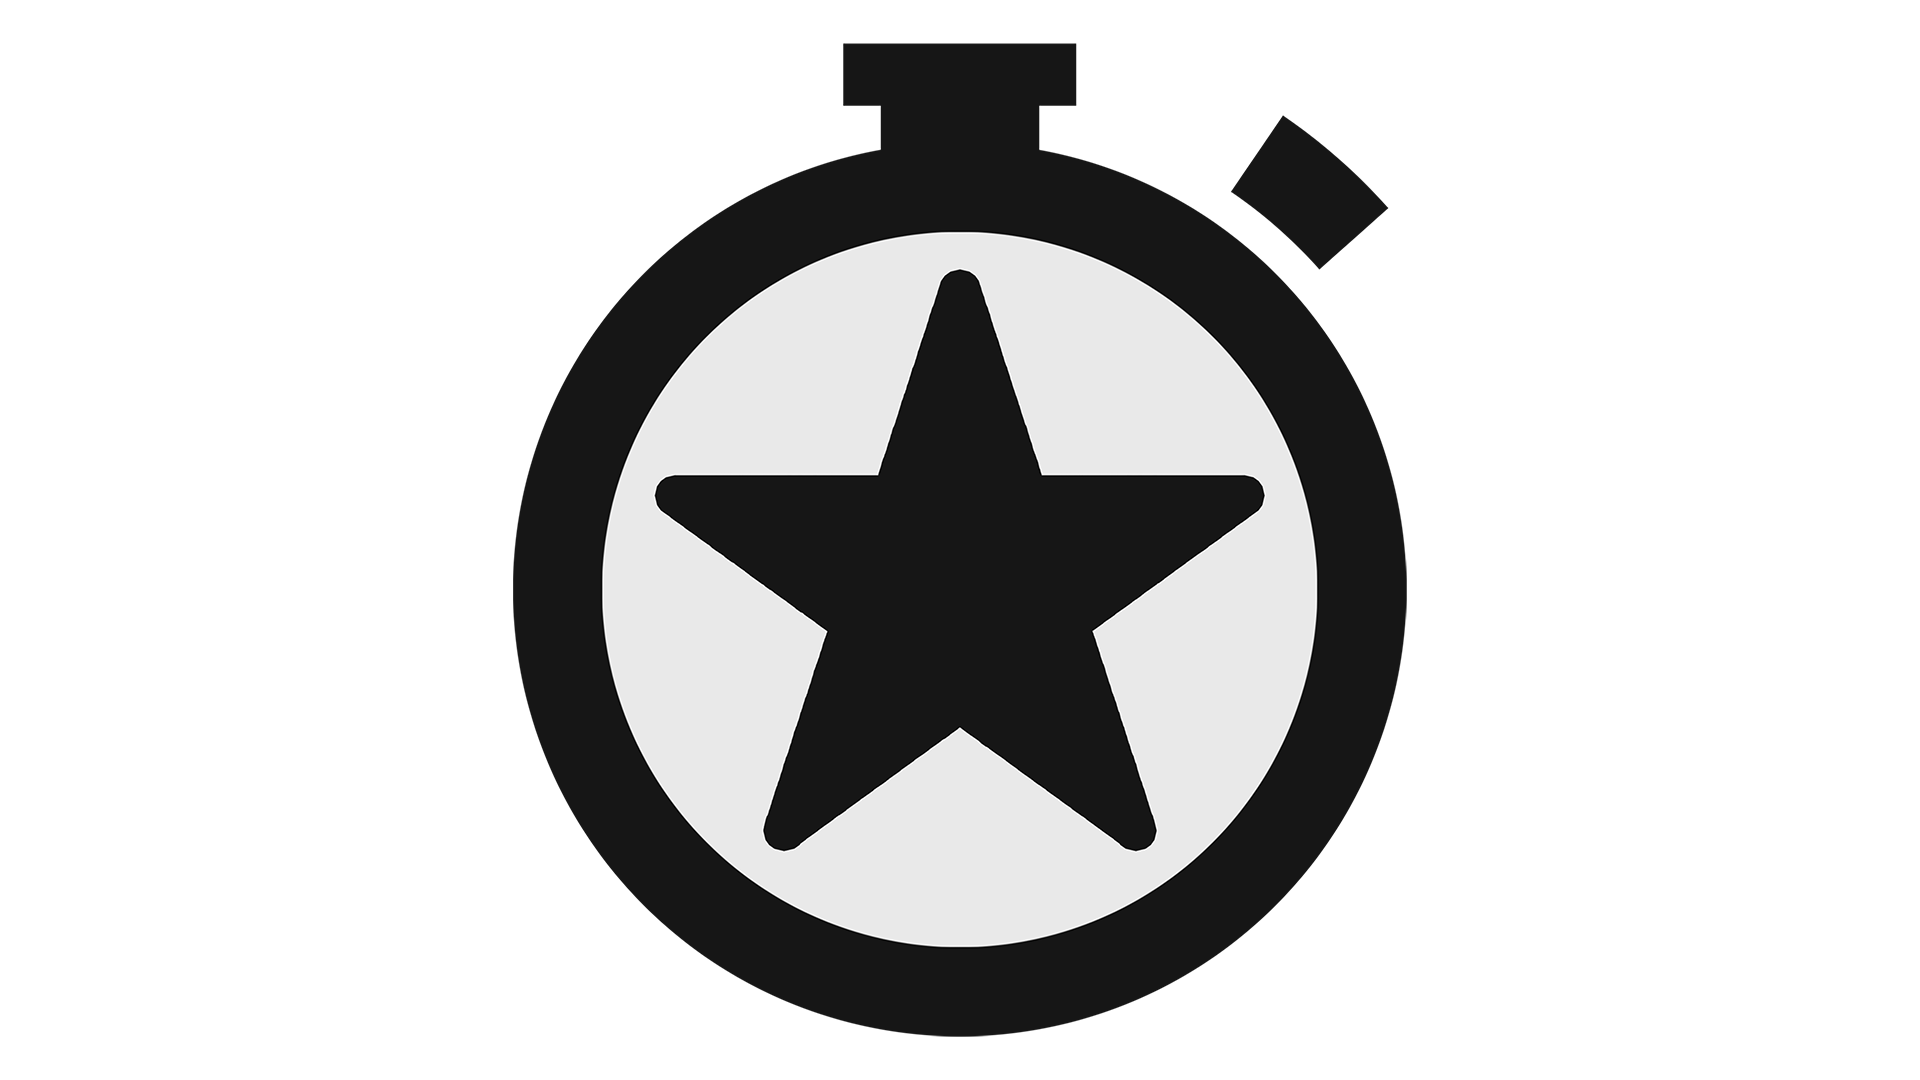 Icon for Time crusher